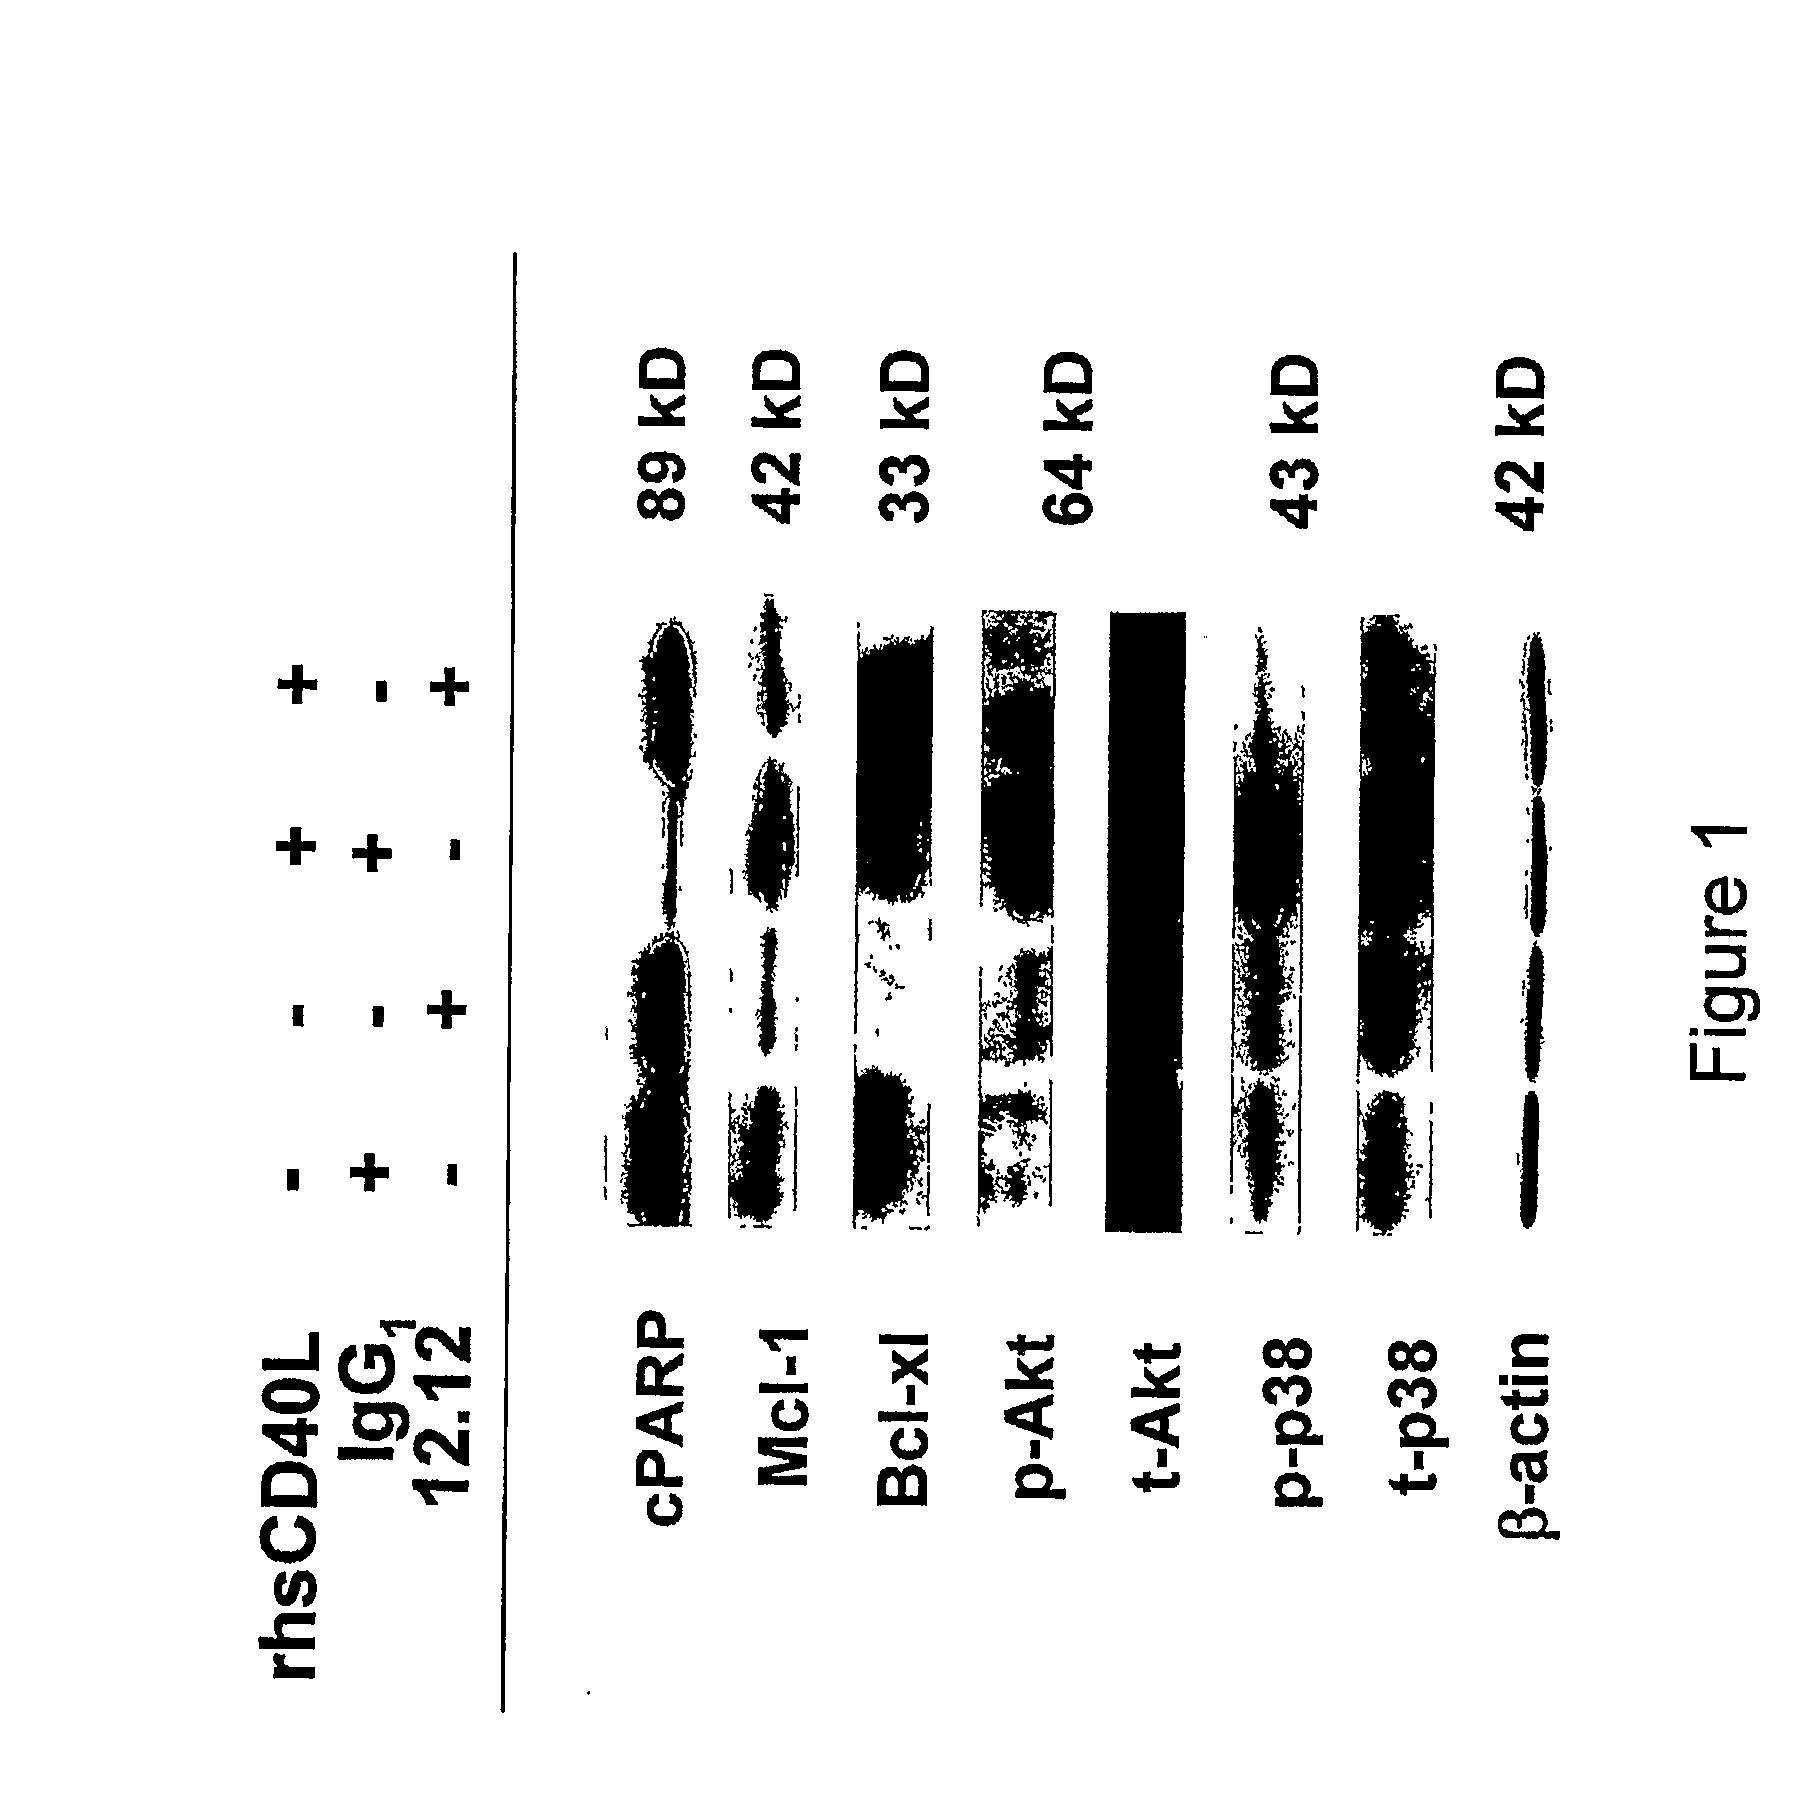 Methods for Diagnosis and Treatment of Diseases Having an Autoimmune and/or Inflammatory Component